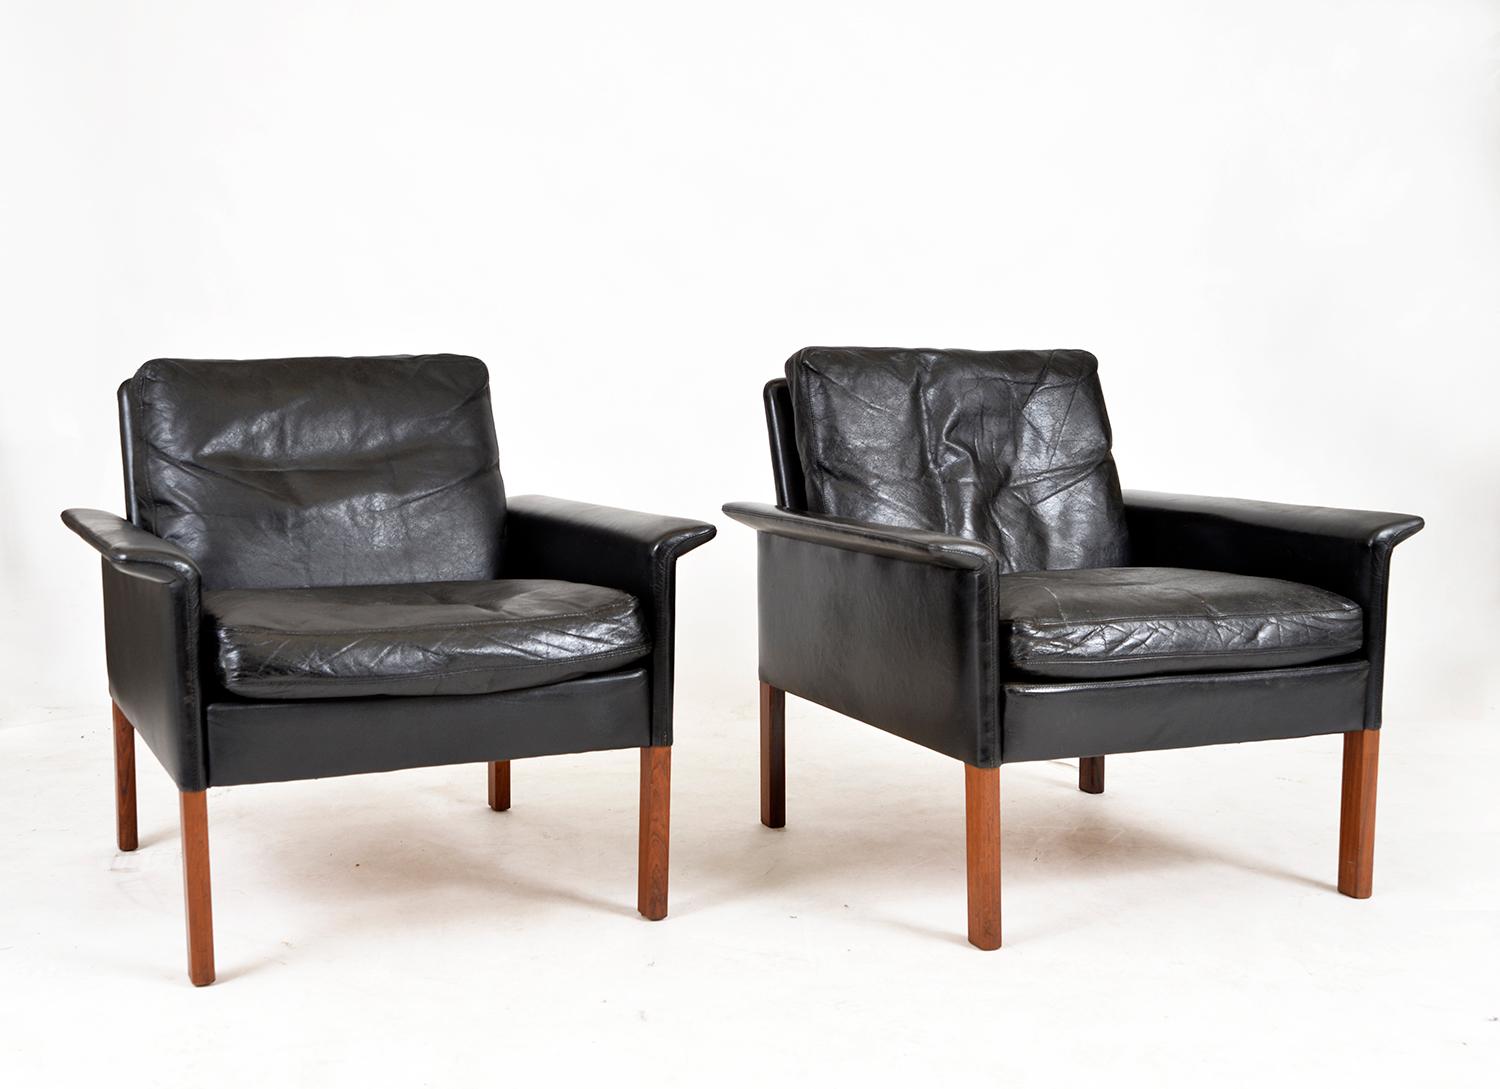 This handsome pair of 1960s black leather lounge chairs sat on square hardwood feet are part of the CS500 series designed by Hans Olsen in 1962 for Christian Sørensen & Co (C.S Furniture). 
These mid-century chairs have been well loved over the